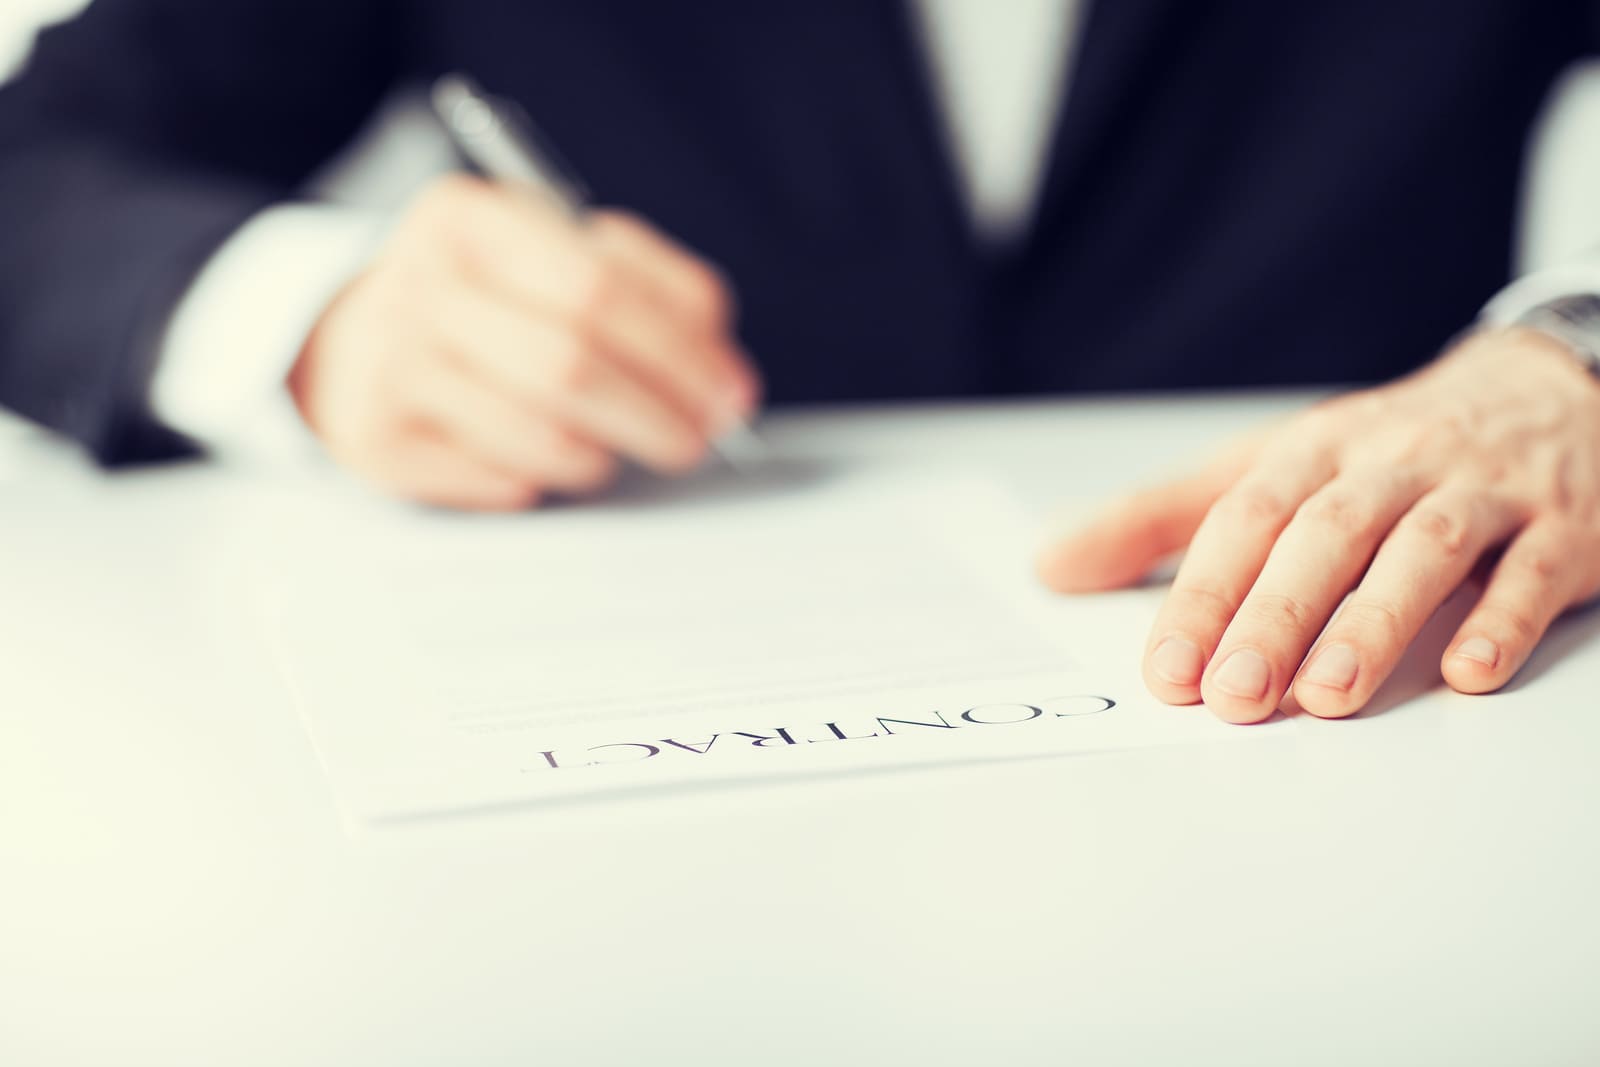 man signing a cleaning contract for small business